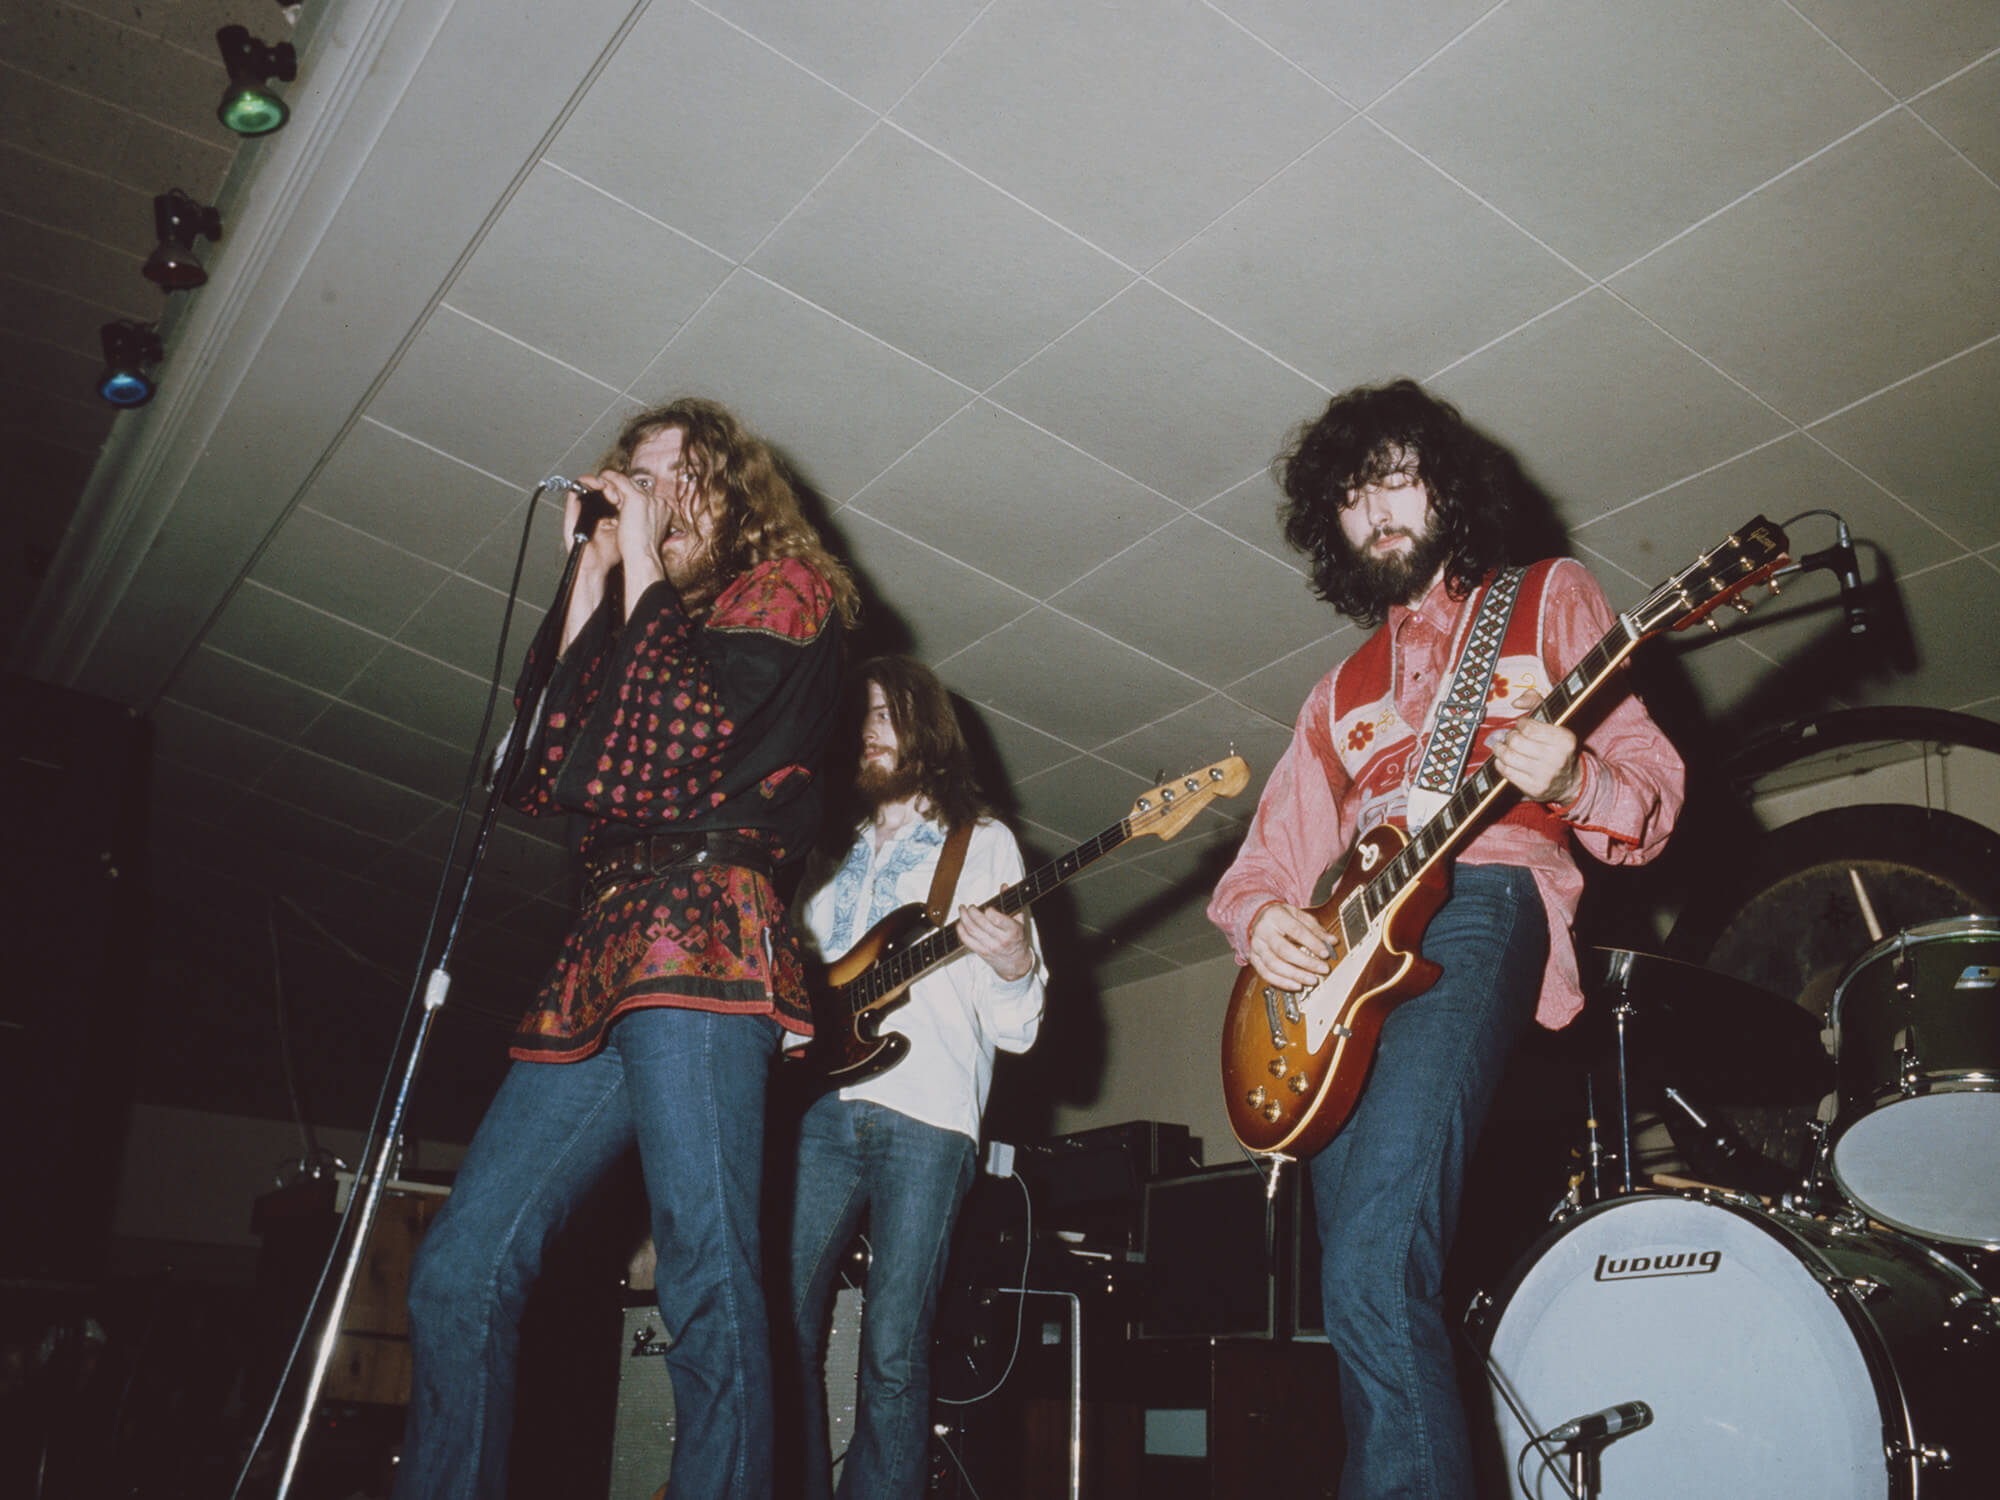 Led Zeppelin performing in 1969, photo by Michael Putland/Getty Images